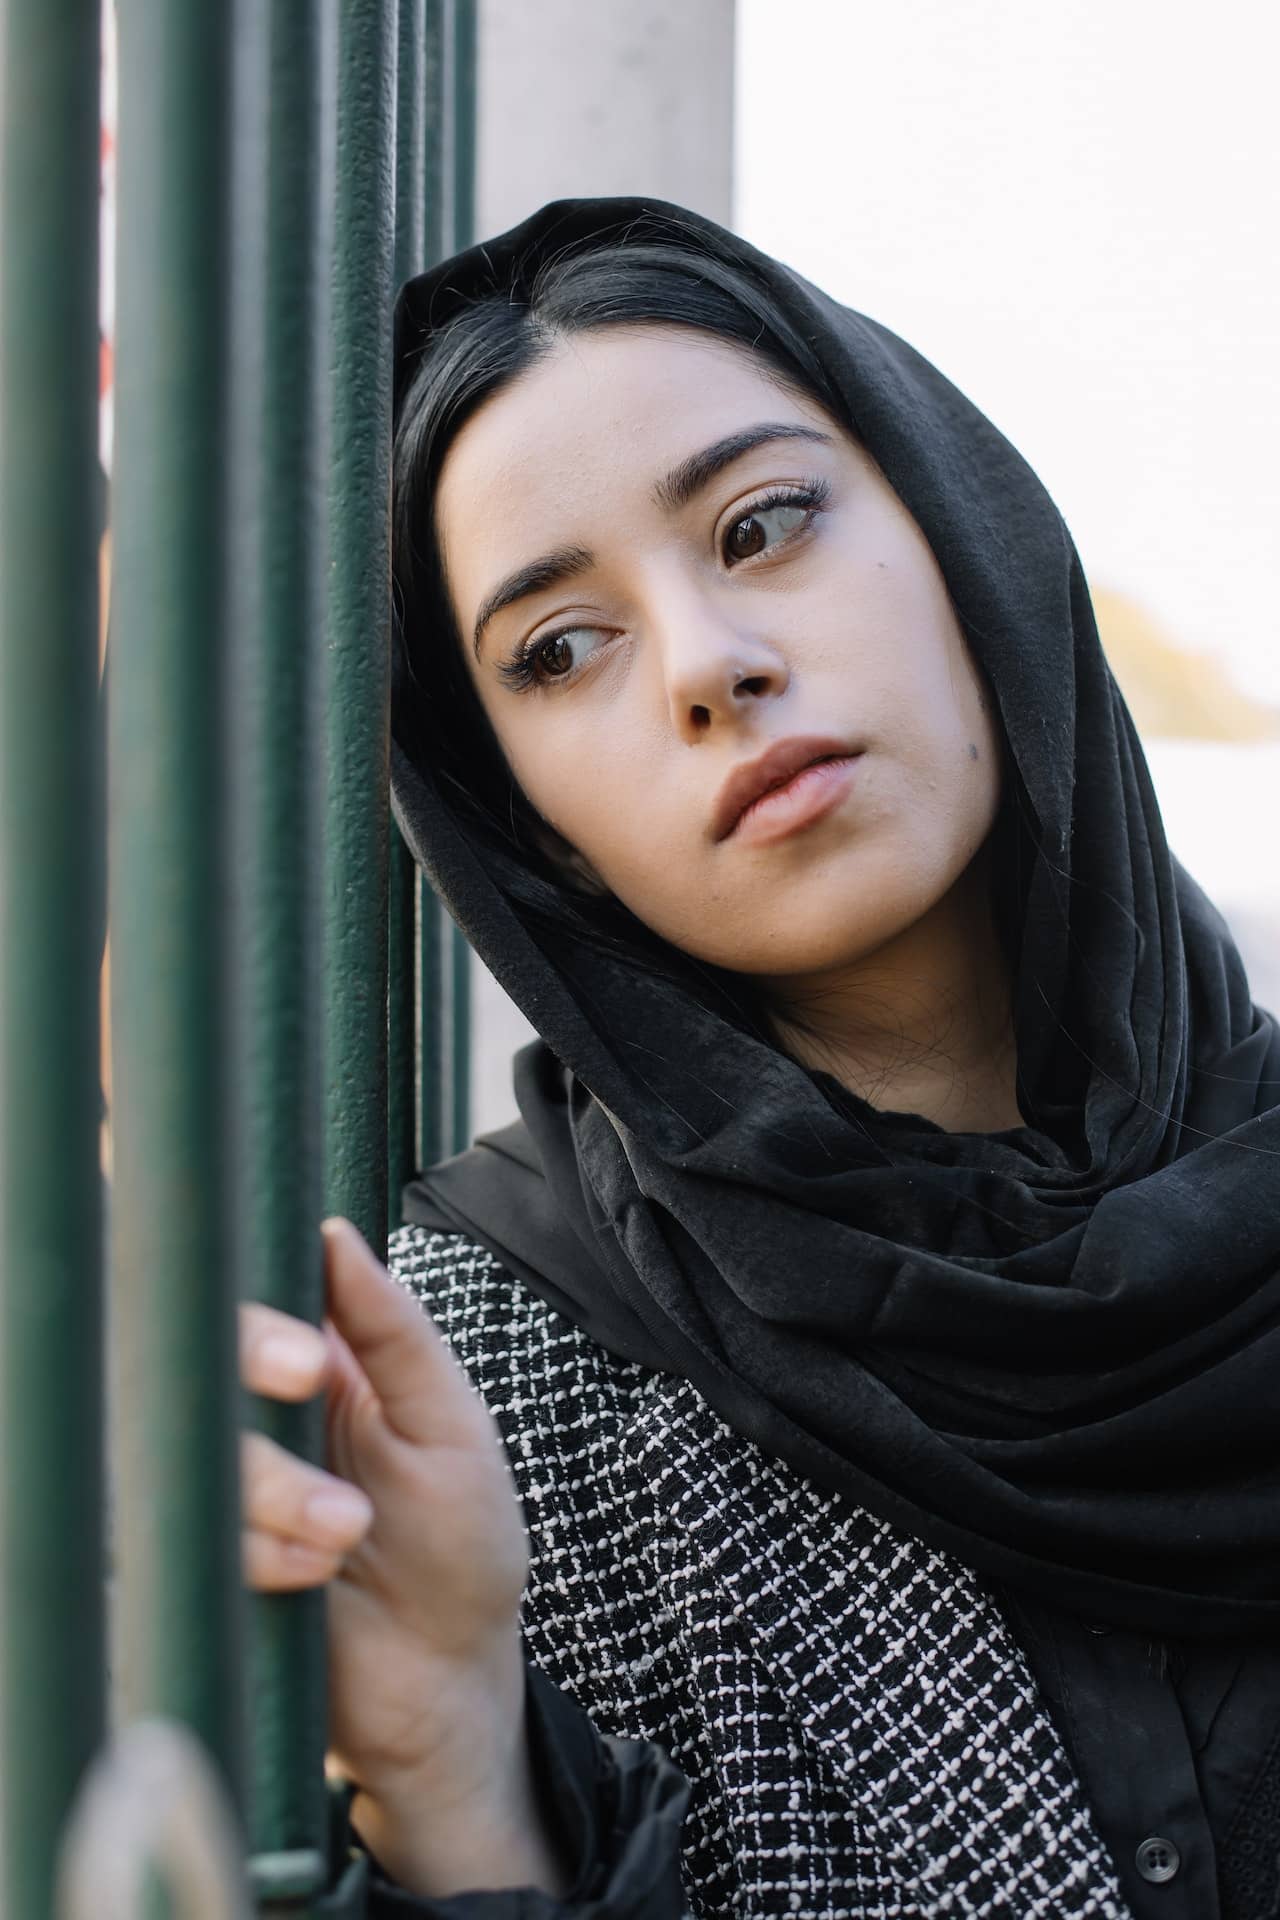 A woman in a dark coat and black hijab rests her head against a gate with a melancholy expression.